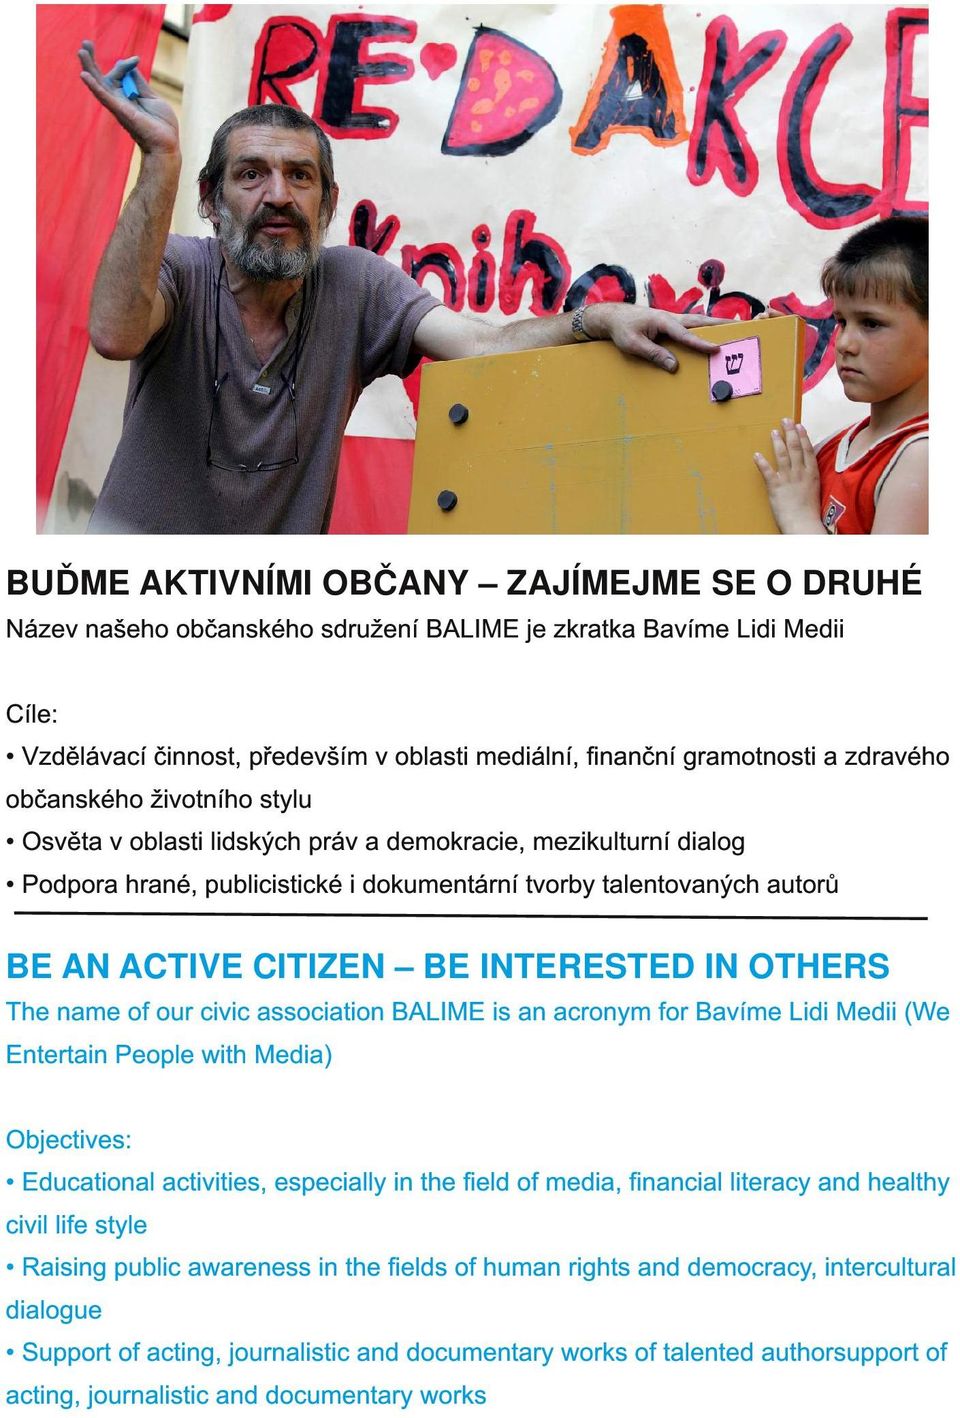 INTERESTED IN OTHERS The name of our civic association BALIME is an acronym for Bavíme Lidi Medii (We Entertain People with Media) Objectives: Educational activities, especially in the field of